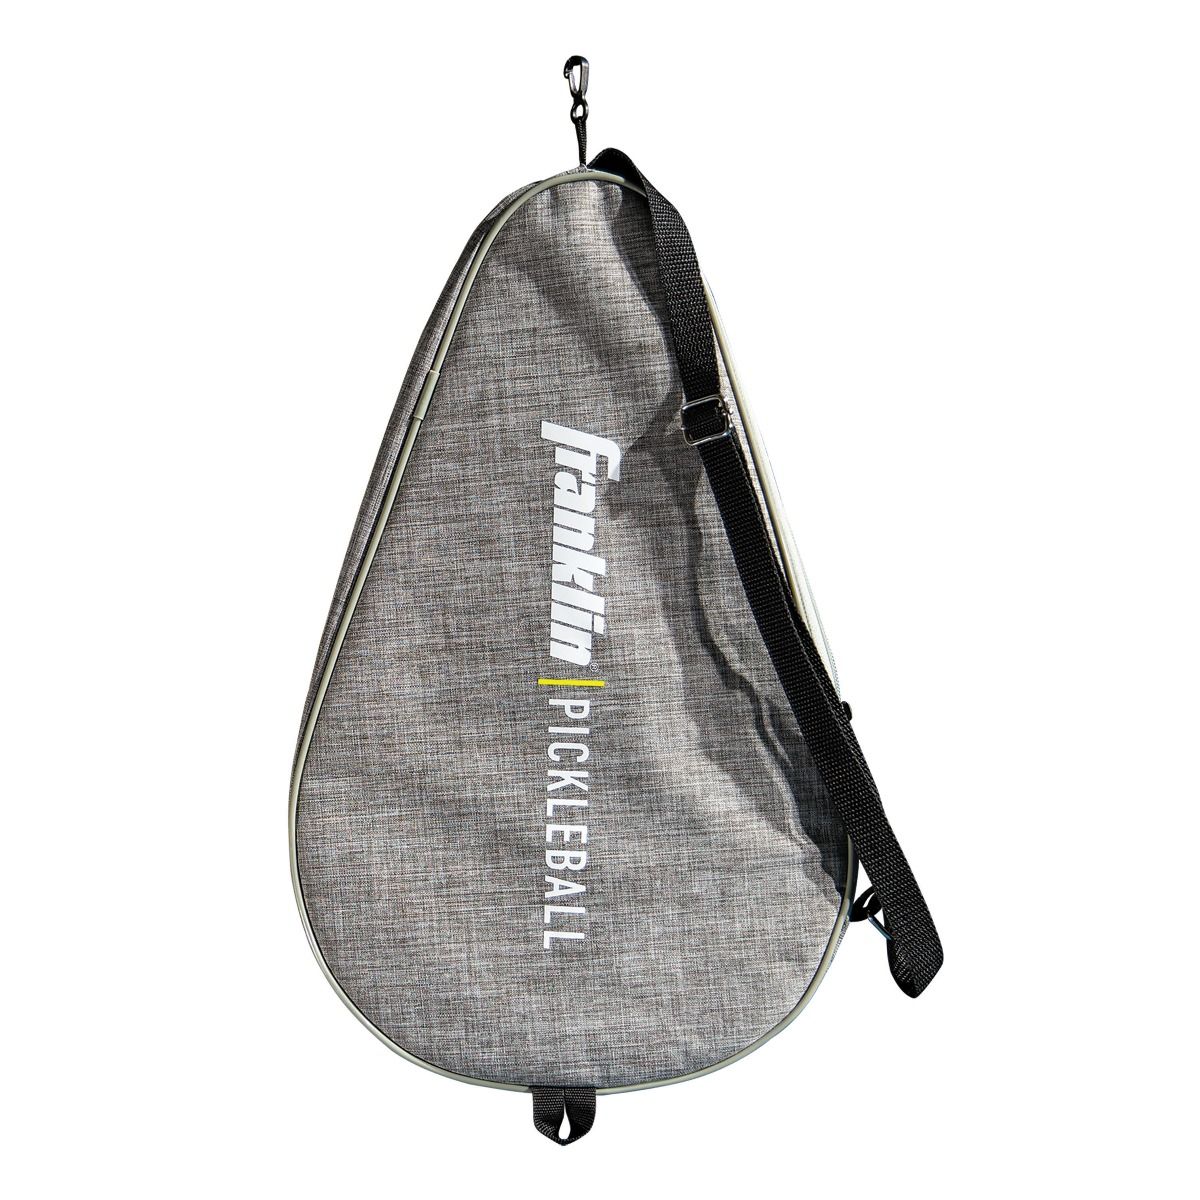 A Franklin Pickleball Paddle Bag with a padded carry strap and the word Franklin on it.